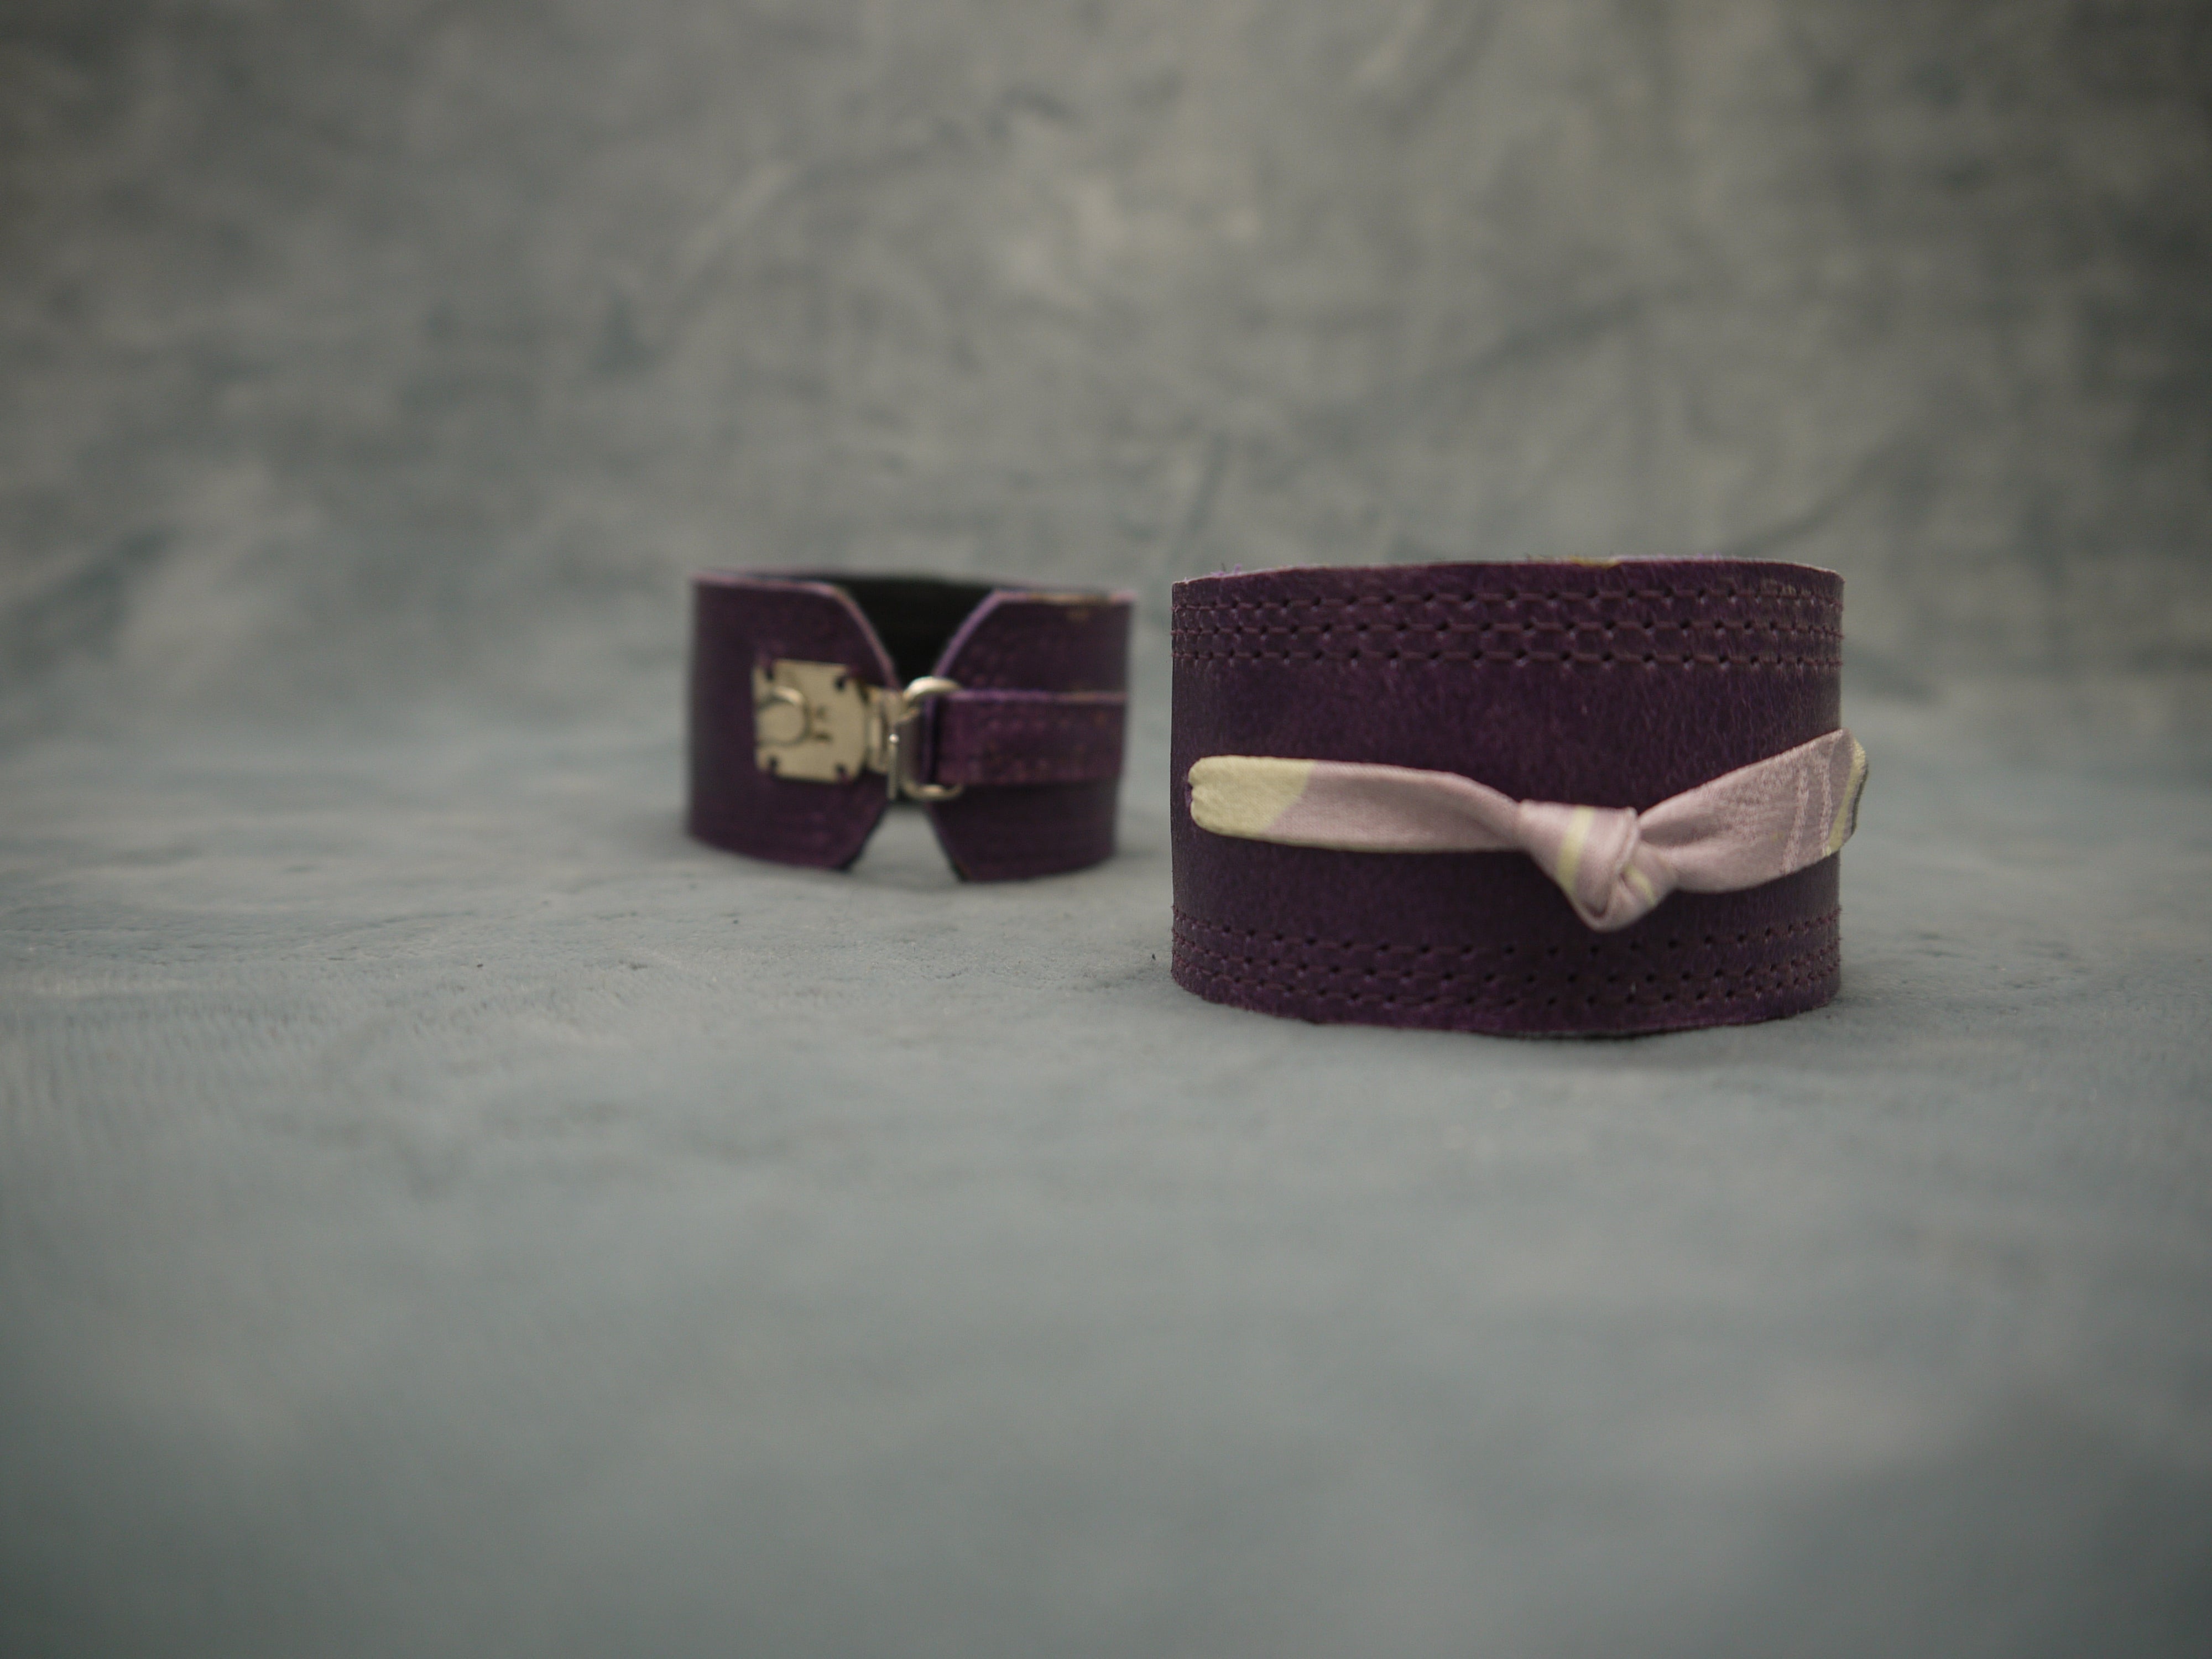 Royal Purple slimline Italian leather cuff with lilac slim silk knot central on the cuff. The cugff has elegant repeat stitch detail around the edges. Close-Up Image. Two cuffs are shown worn, one from the front and one from the back with the clasp closure .